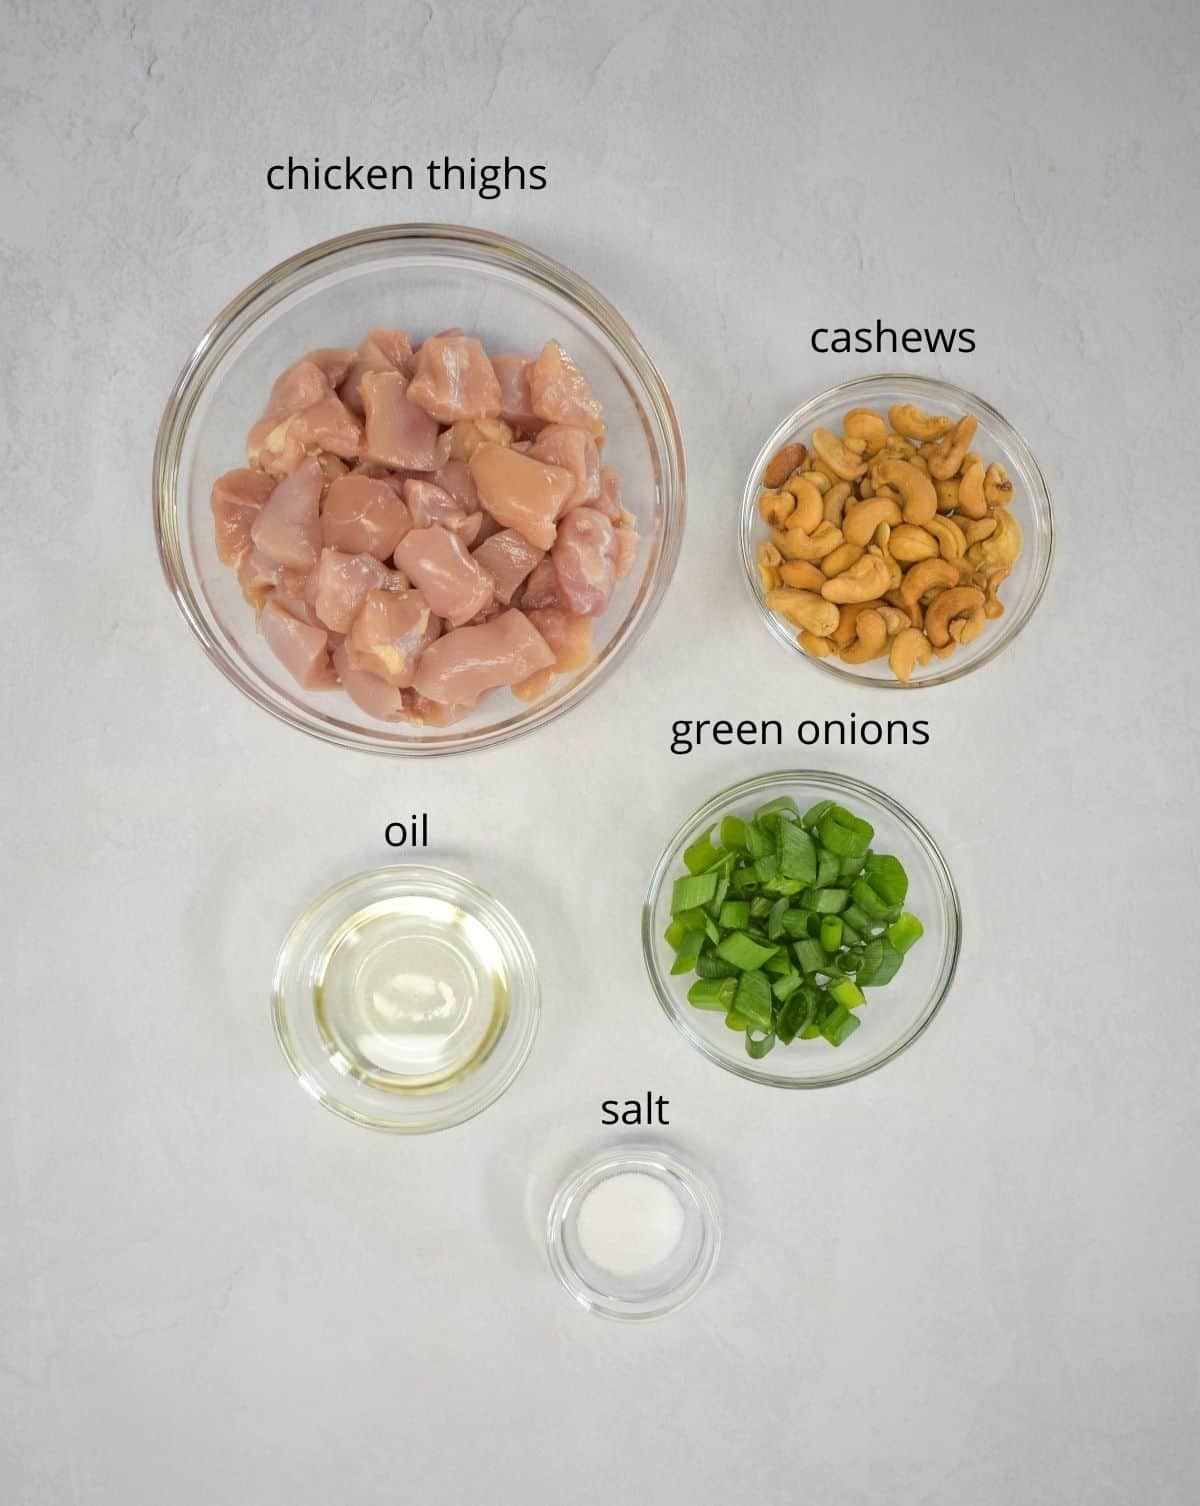 An image of the prepped ingredients to cook the chicken for the dish arranged in glass bowls and set on a white table.